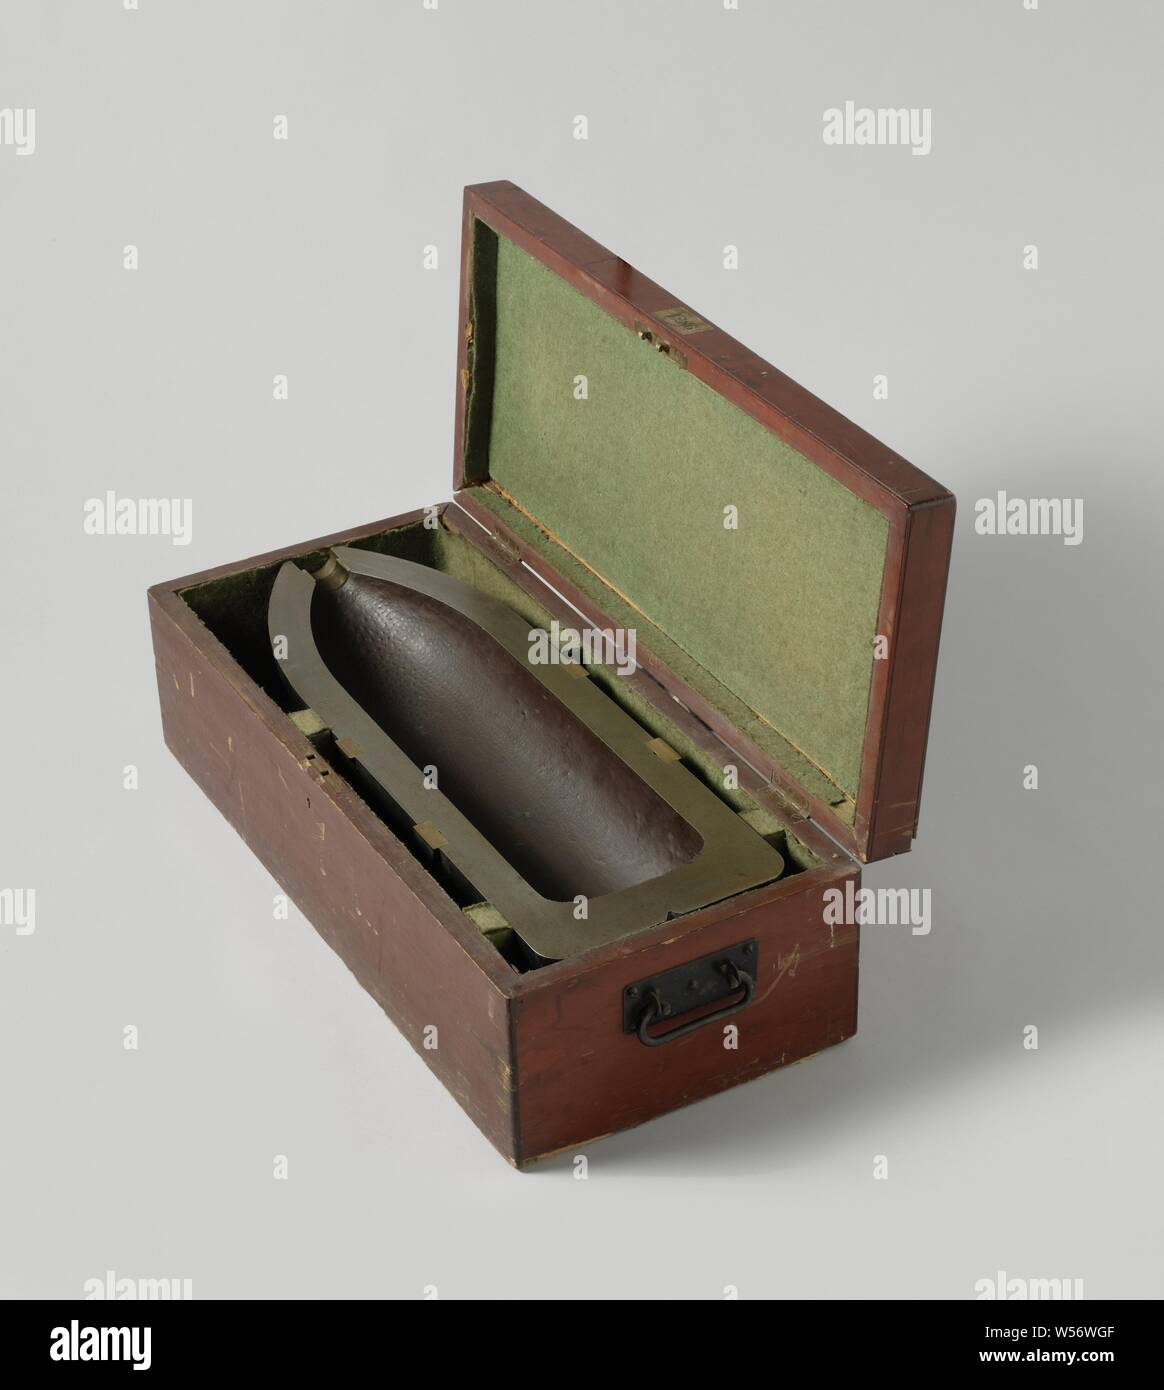 23 cm Shell in a Wooden Box, Half a 23 cm grenade shaped sawn in half, in a wooden box. The grenade is 67.3 cm long and has a caliber of 227 mm. It has two rings of pressed-in cams for a drawn barrel with six pulling fields and is hollow, a tube hole in the nose. Shallow holes for the ammunition tap are provided at the top., W.G. Armstrong & Co, Newcastle upon Tyne, 1868, iron (metal), bronze (metal), brass (alloy), wood (plant material), shell: h 11.3 cm × w 67.3 cm × d 22.7 cm box: h 21.5 cm × w 72 cm × d 32.5 cm w 59 kg Stock Photo